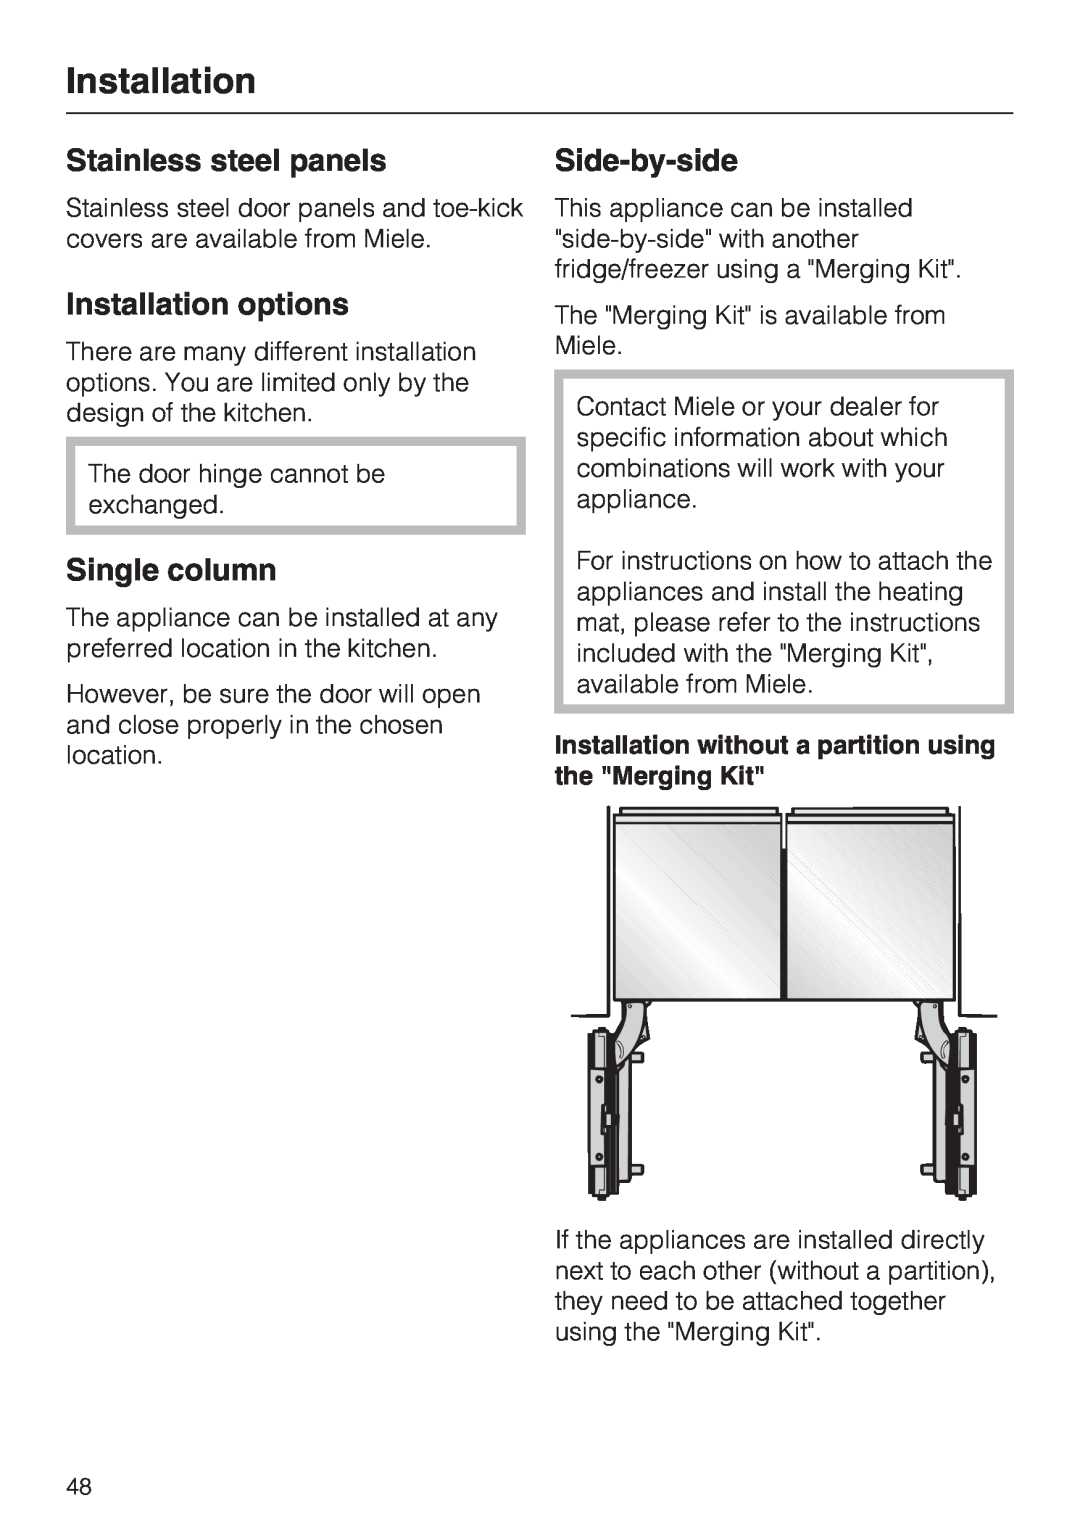 Miele F 1411 SF installation instructions Stainless steel panels, Installation options, Single column, Side-by-side 